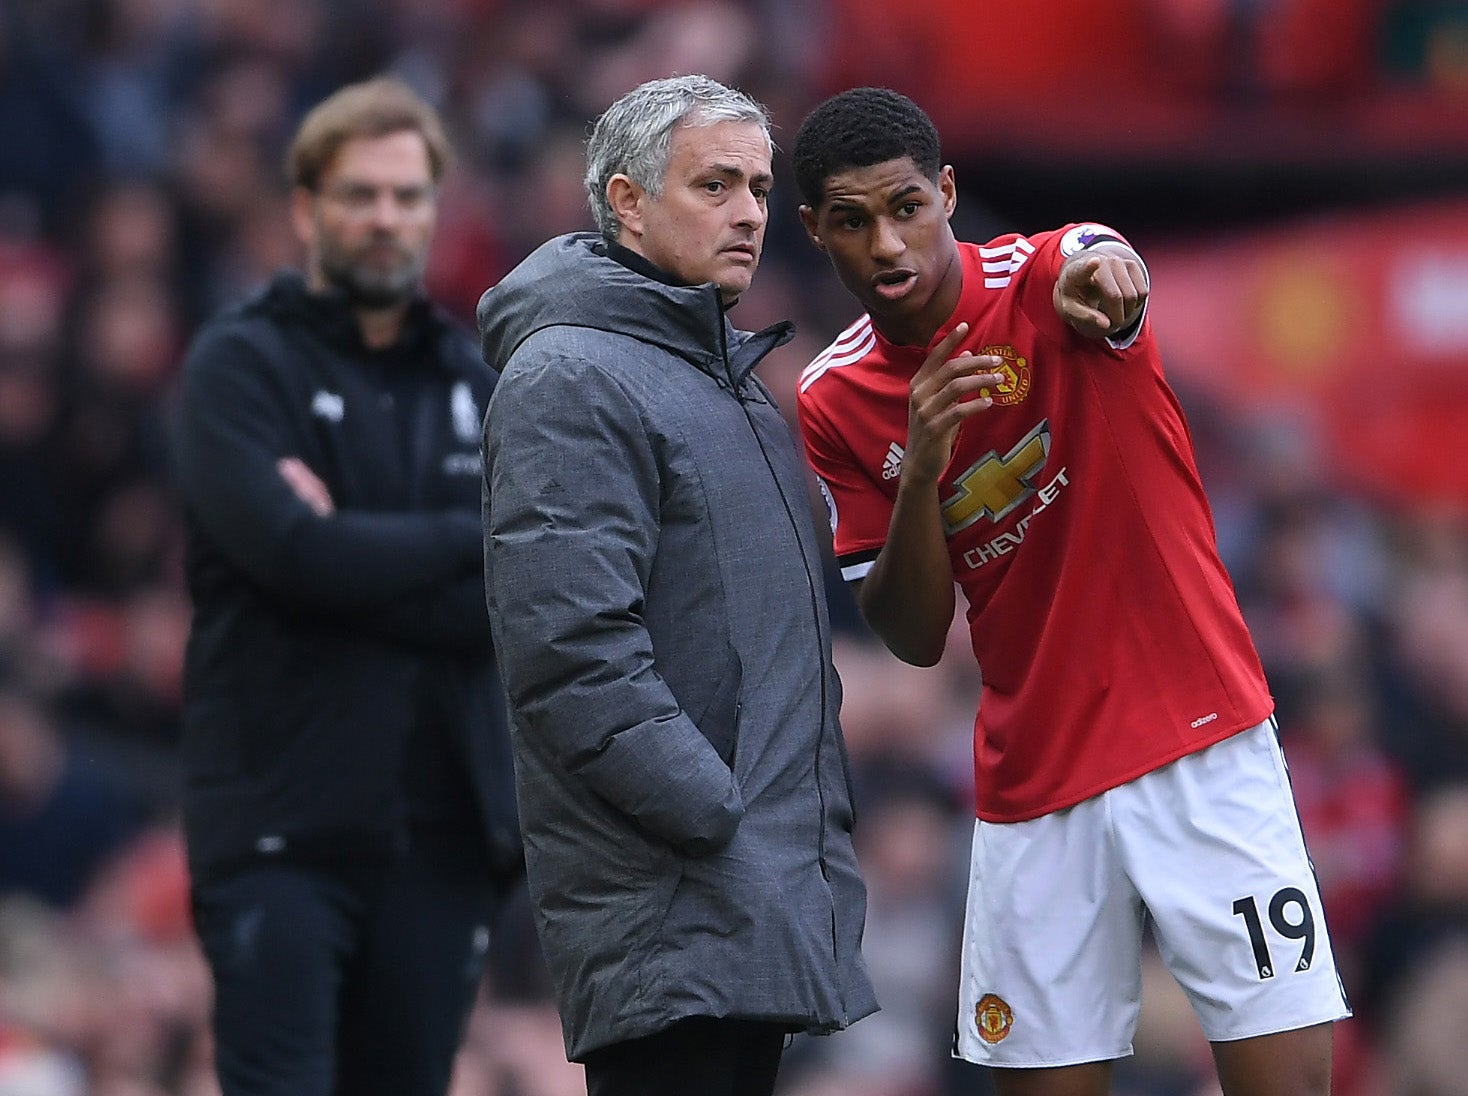 Rashford starred for United but Mourinho could have substituted him